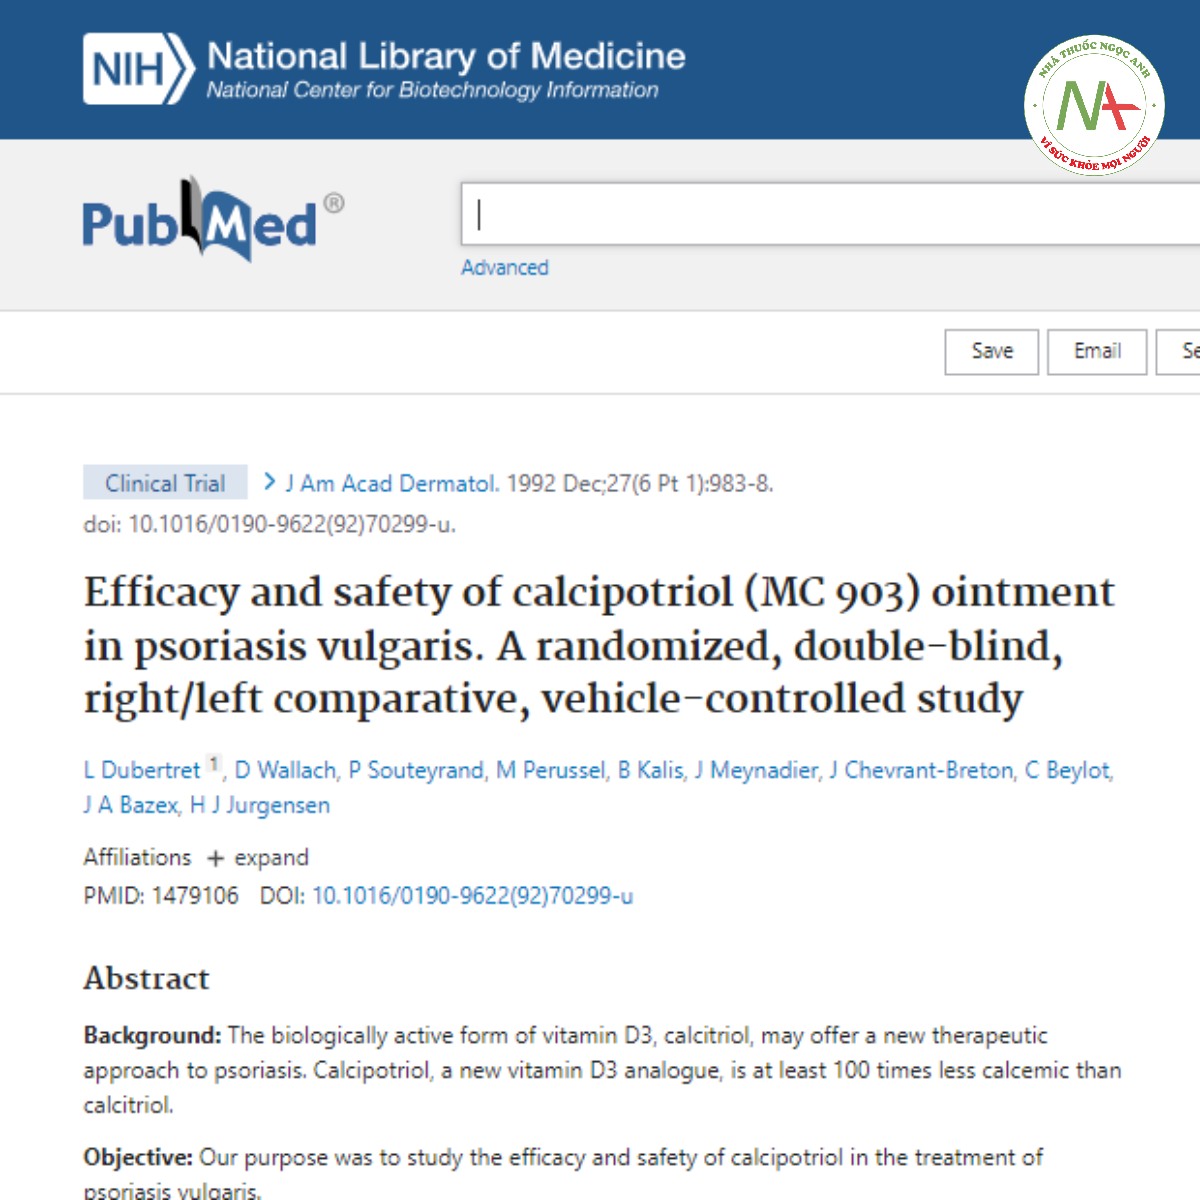 Efficacy and safety of calcipotriol (MC 903) ointment in psoriasis vulgaris. A randomized, double-blind, right_left comparative, vehicle-controlled study